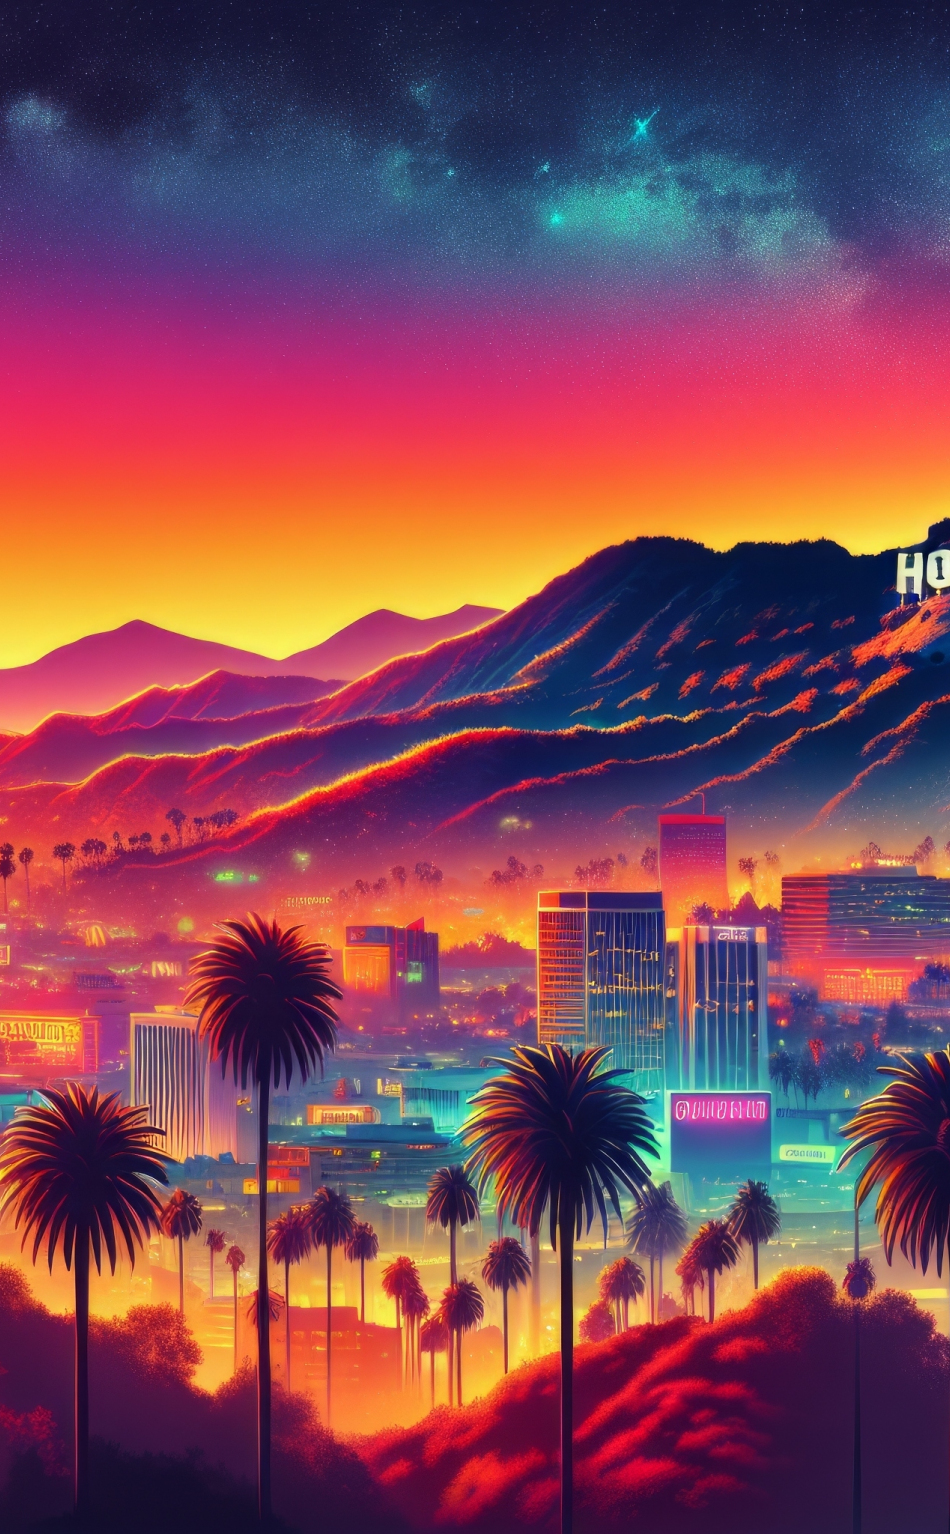 Download wallpaper 950x1534 hollywood's sunset vibes, city, artwork ...